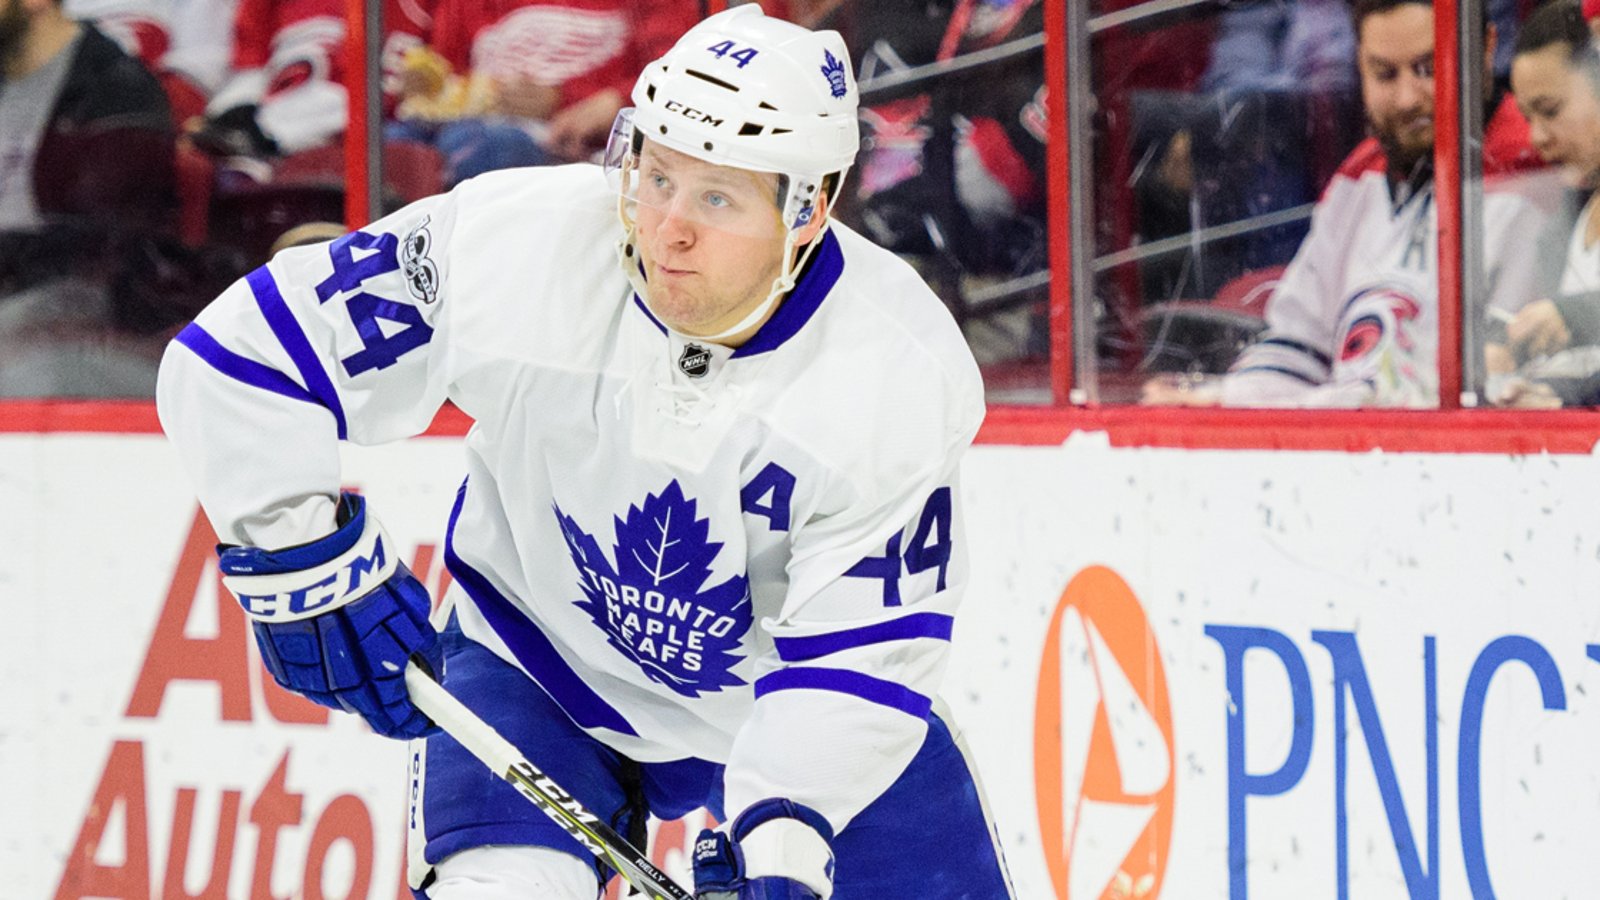 Breaking: Rielly absent from practice